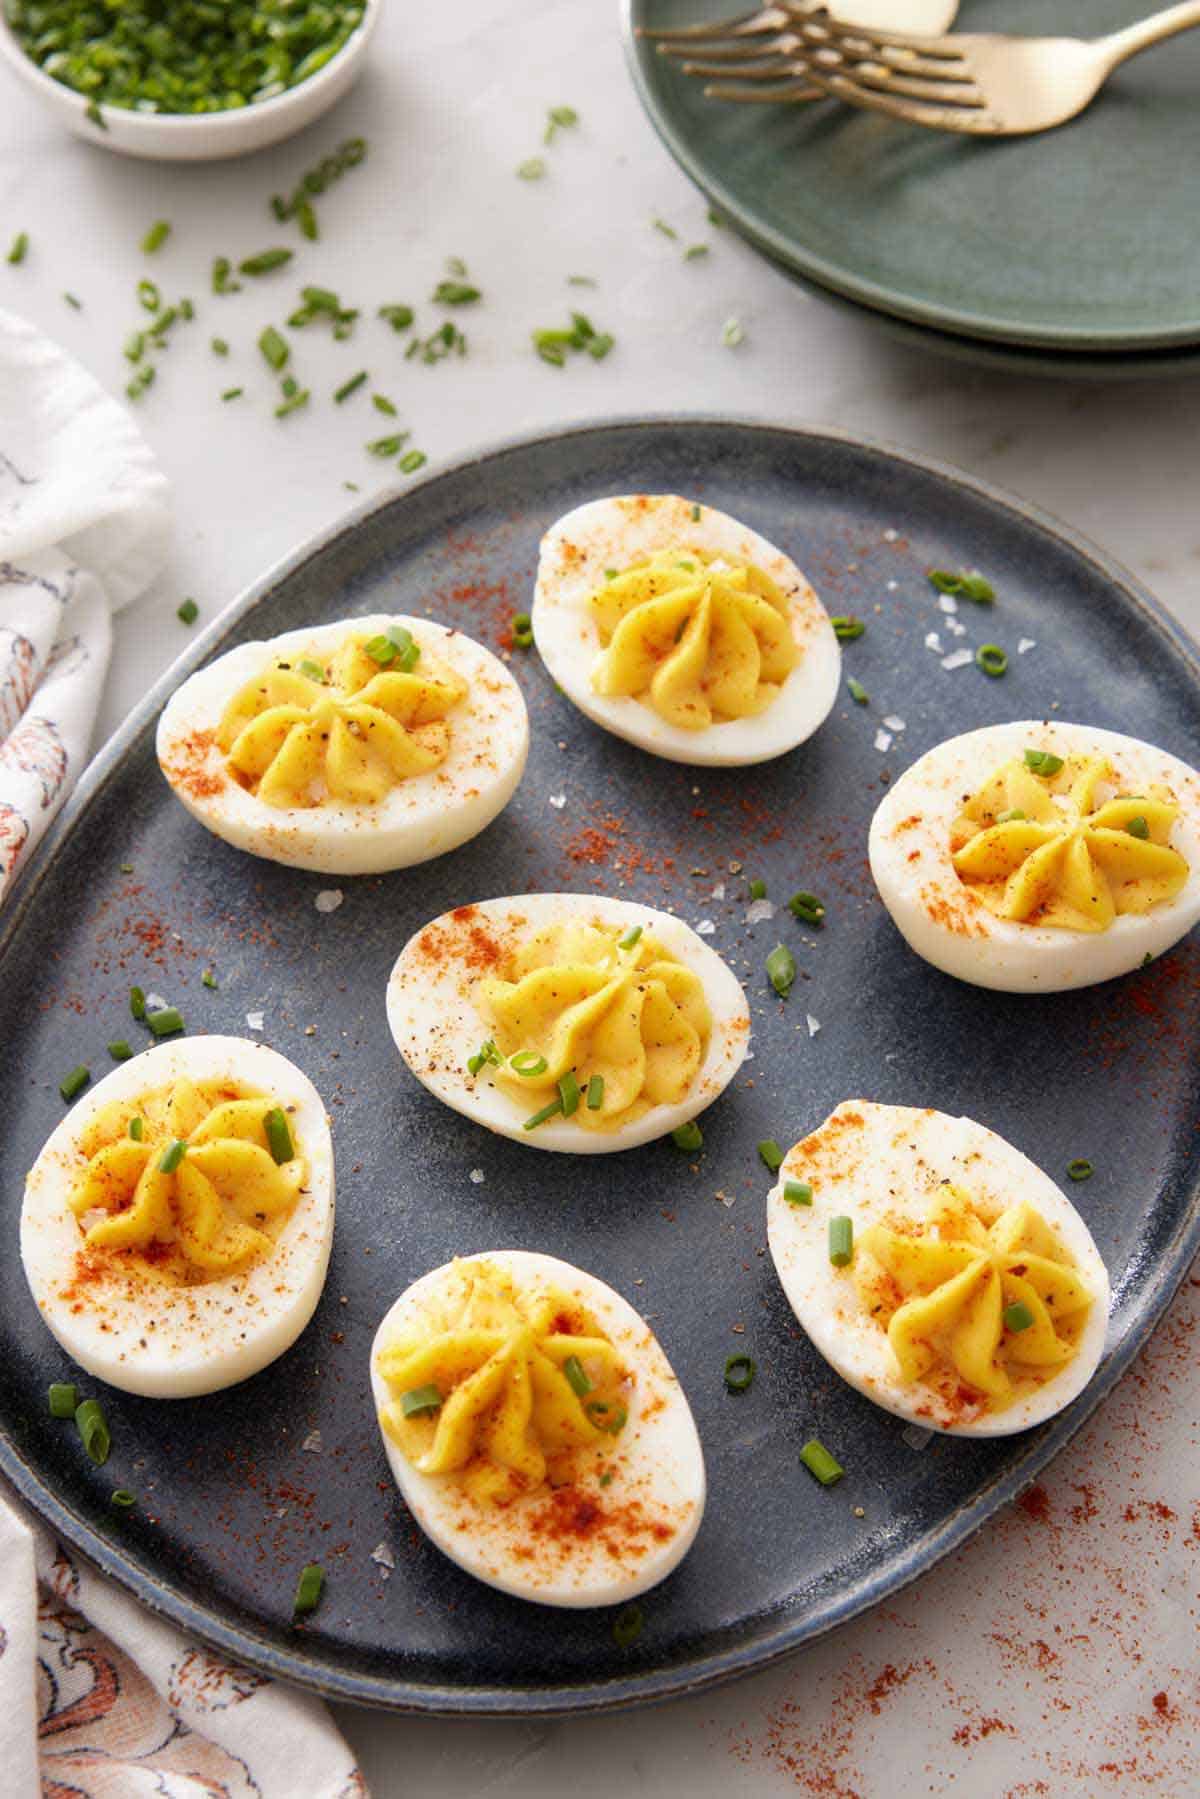 A platter with deviled eggs topped with chives and paprika.